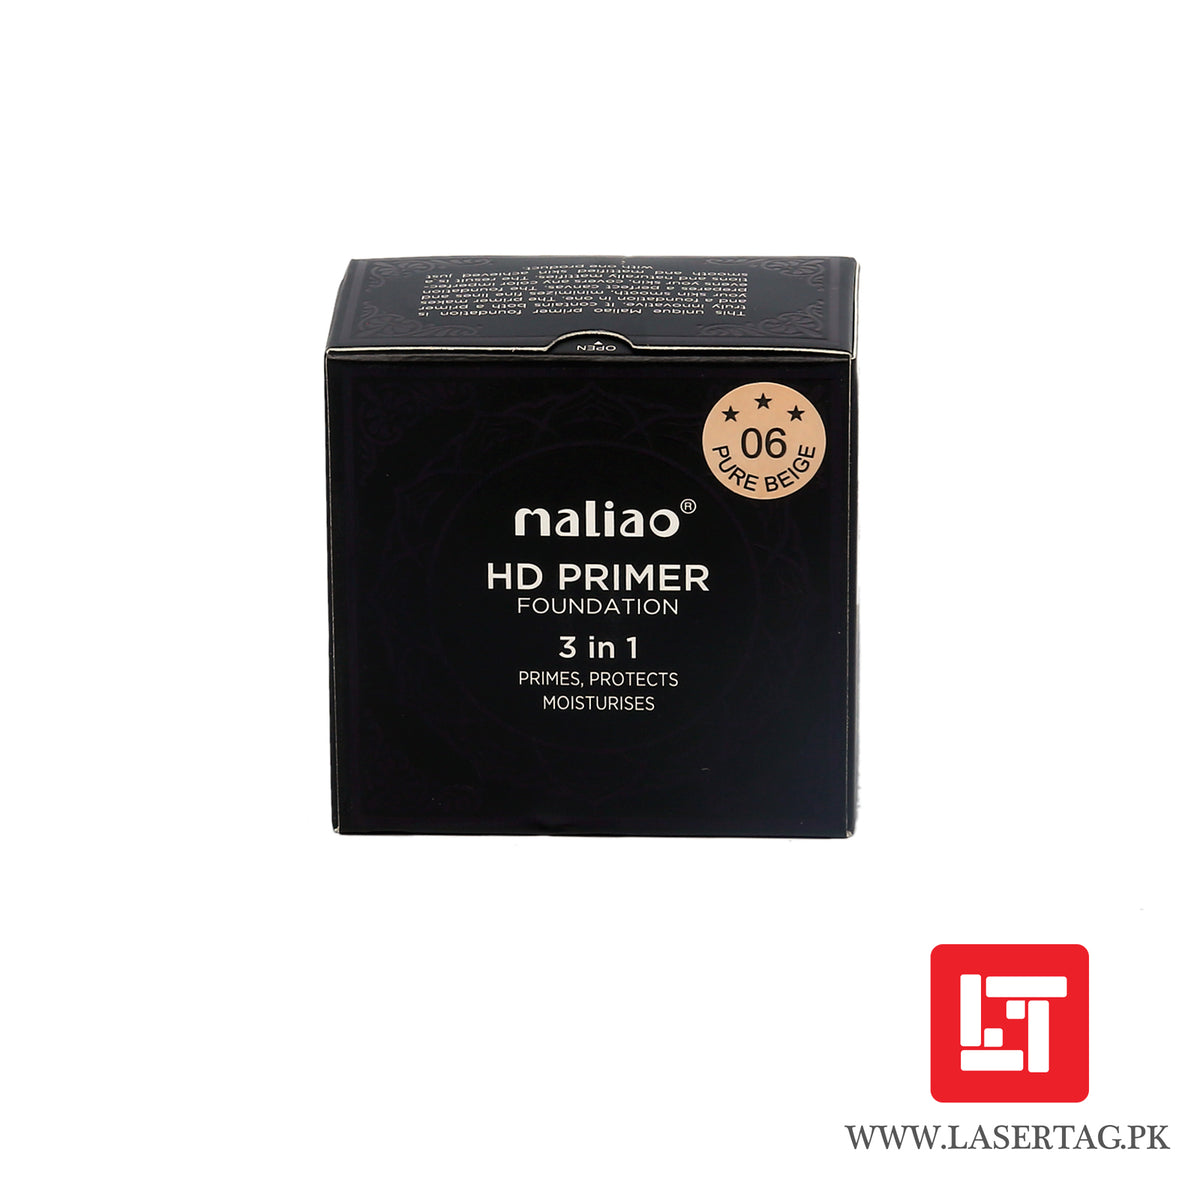 Maliao HD Primer Foundation 3 In 1 Primes, Protects, Moisturises Pure Beige M227-06 20g freeshipping - lasertag.pk